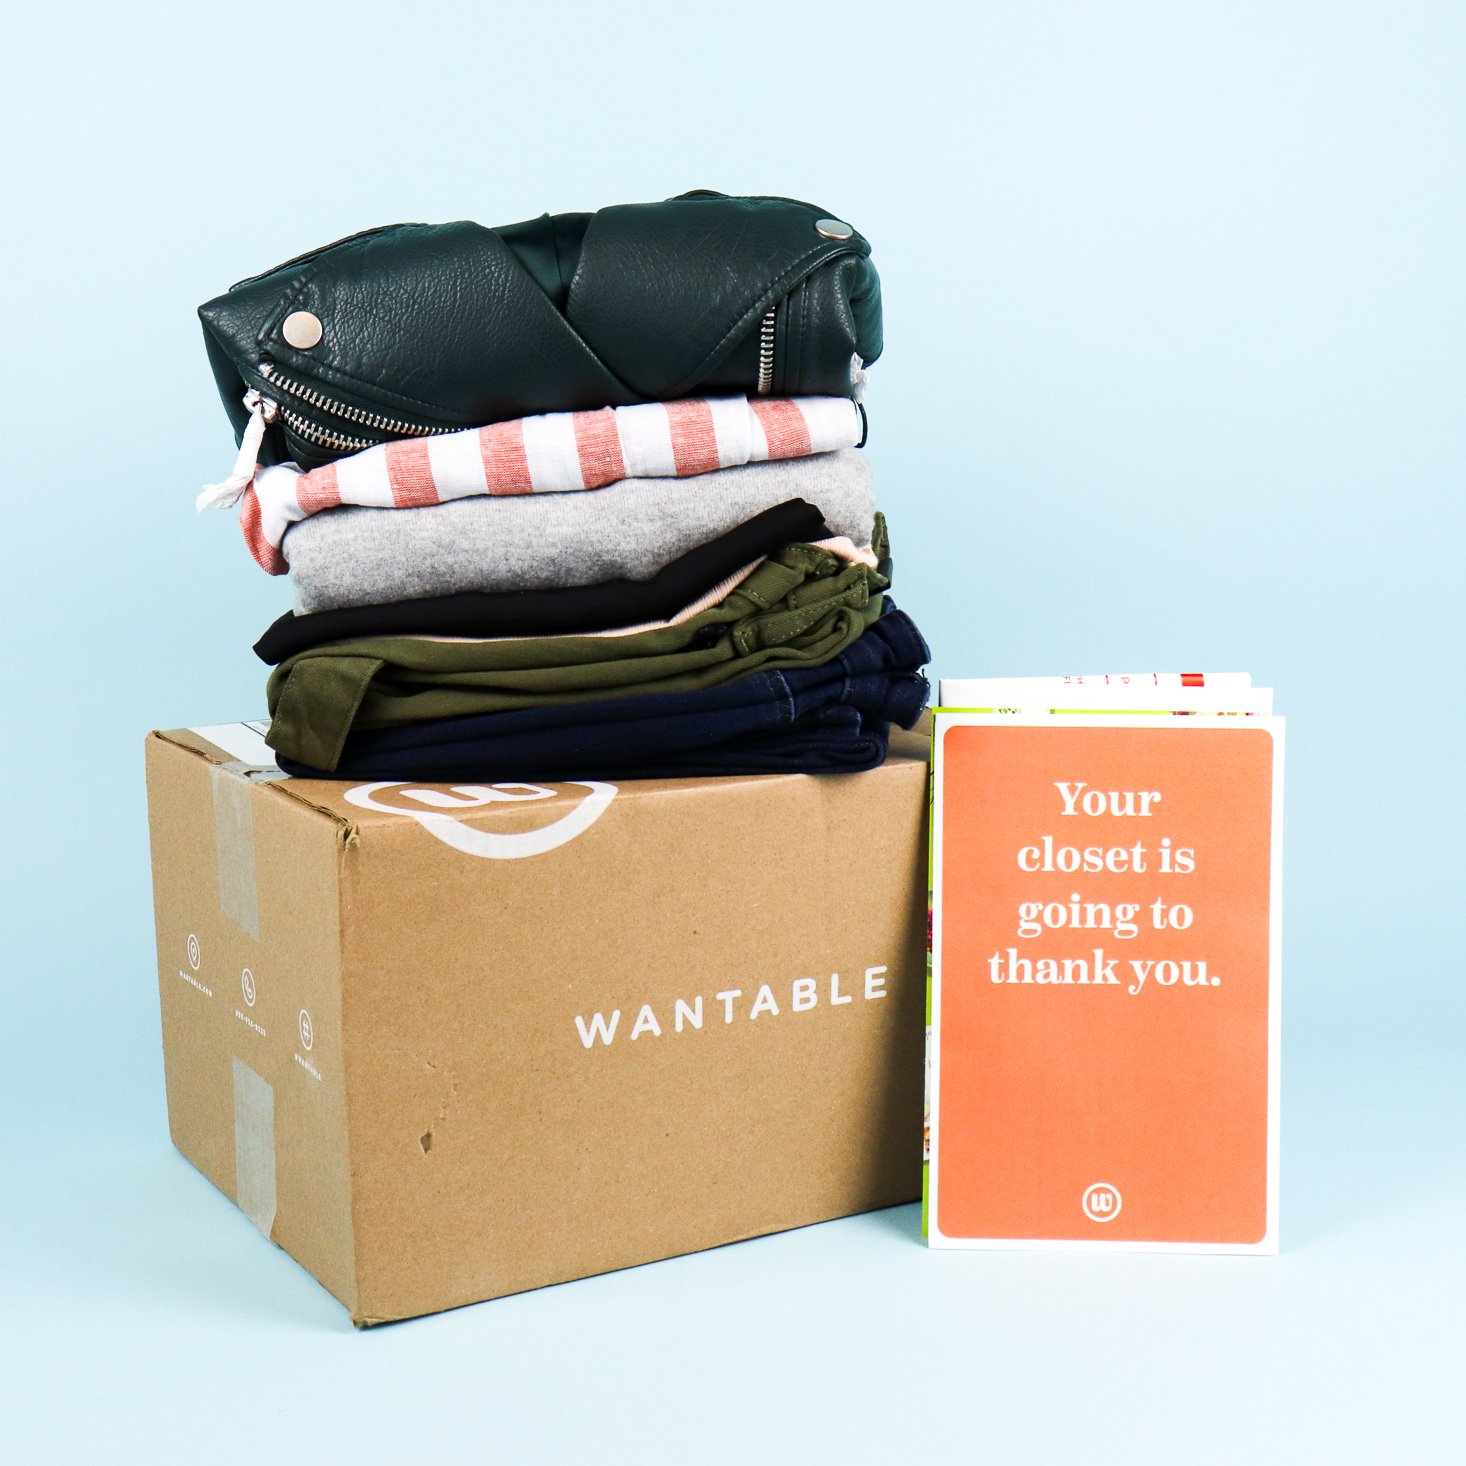 Stitch fix or Wantable? It's your Call👀